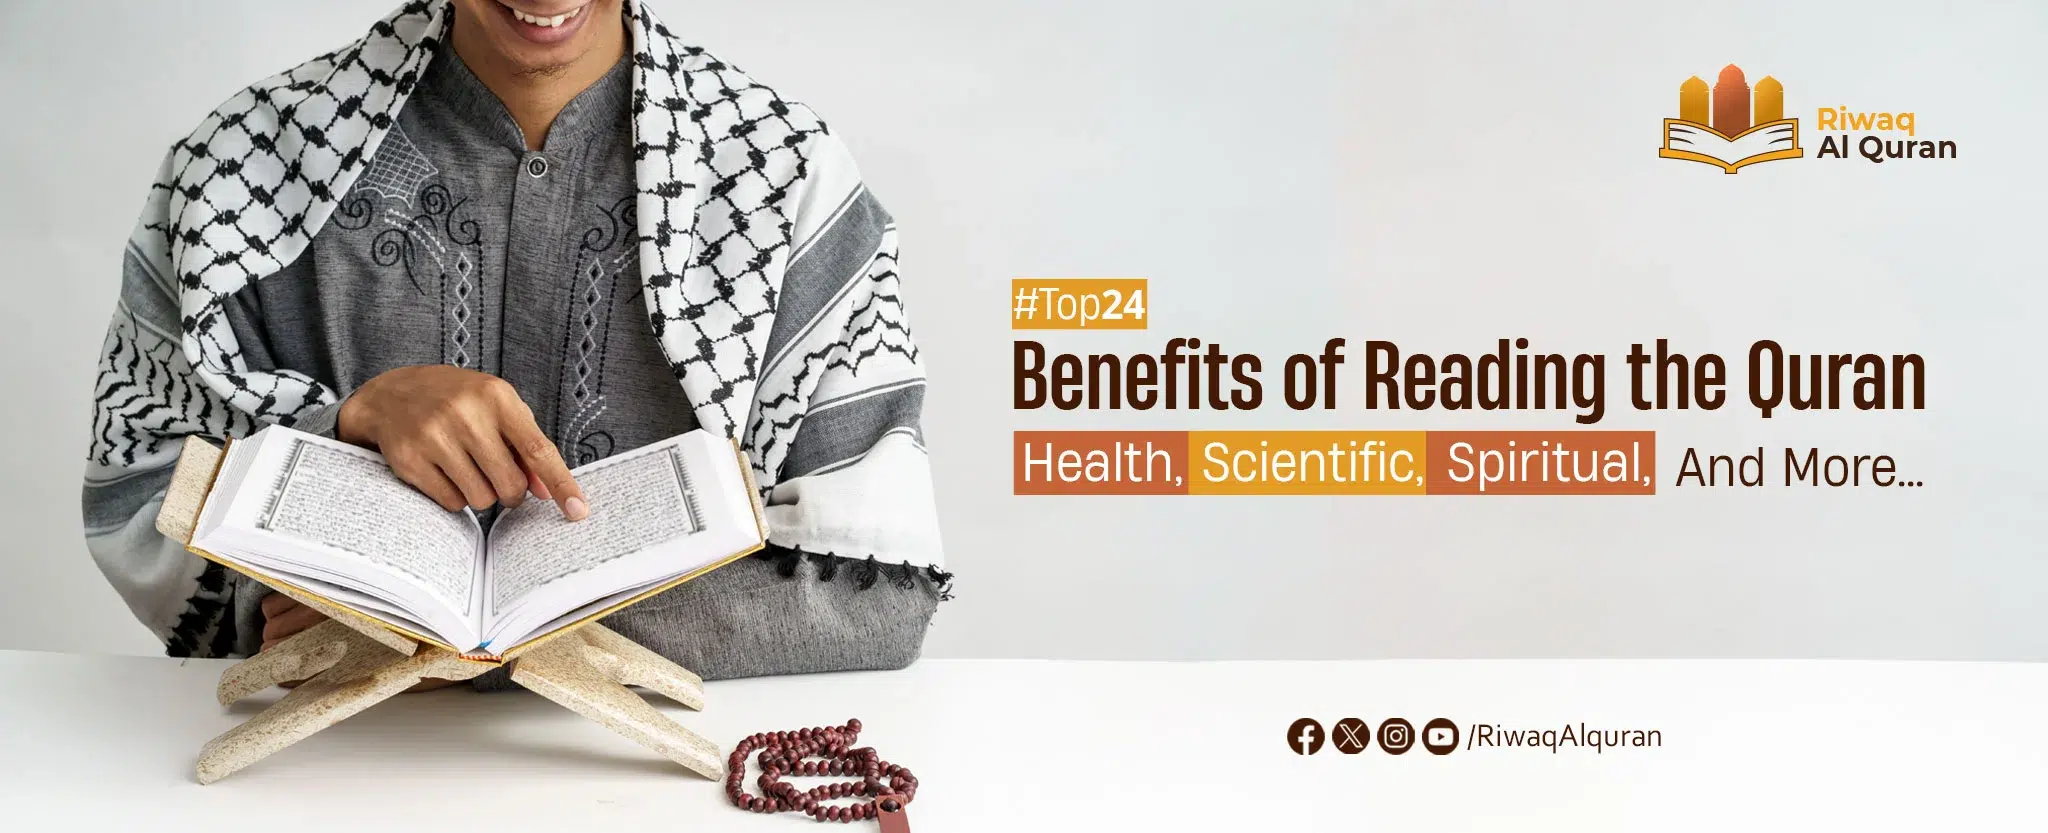 Top 24 Benefits of Reading the Quran: Health, Scientific, Spiritual, And More